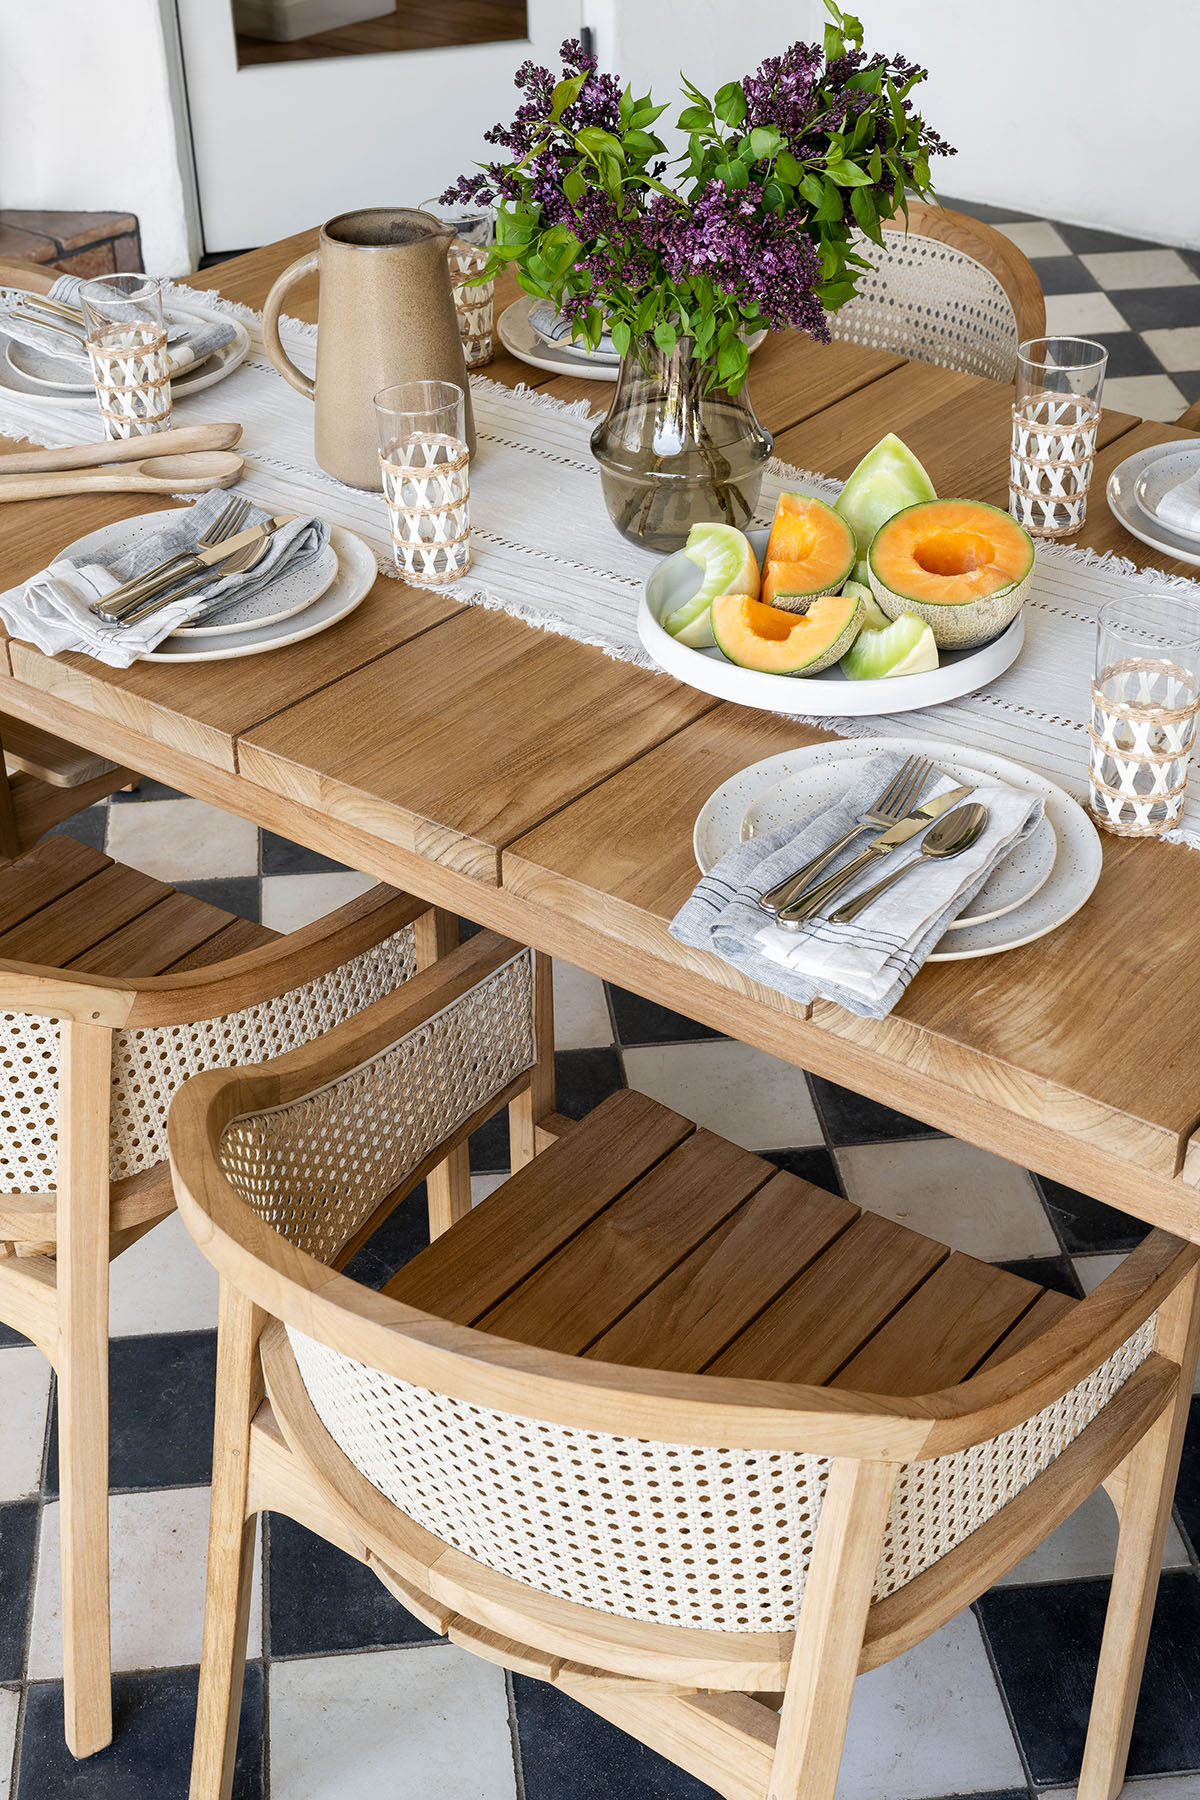 outdoor teak wood dining chairs and table on checkerboard floor